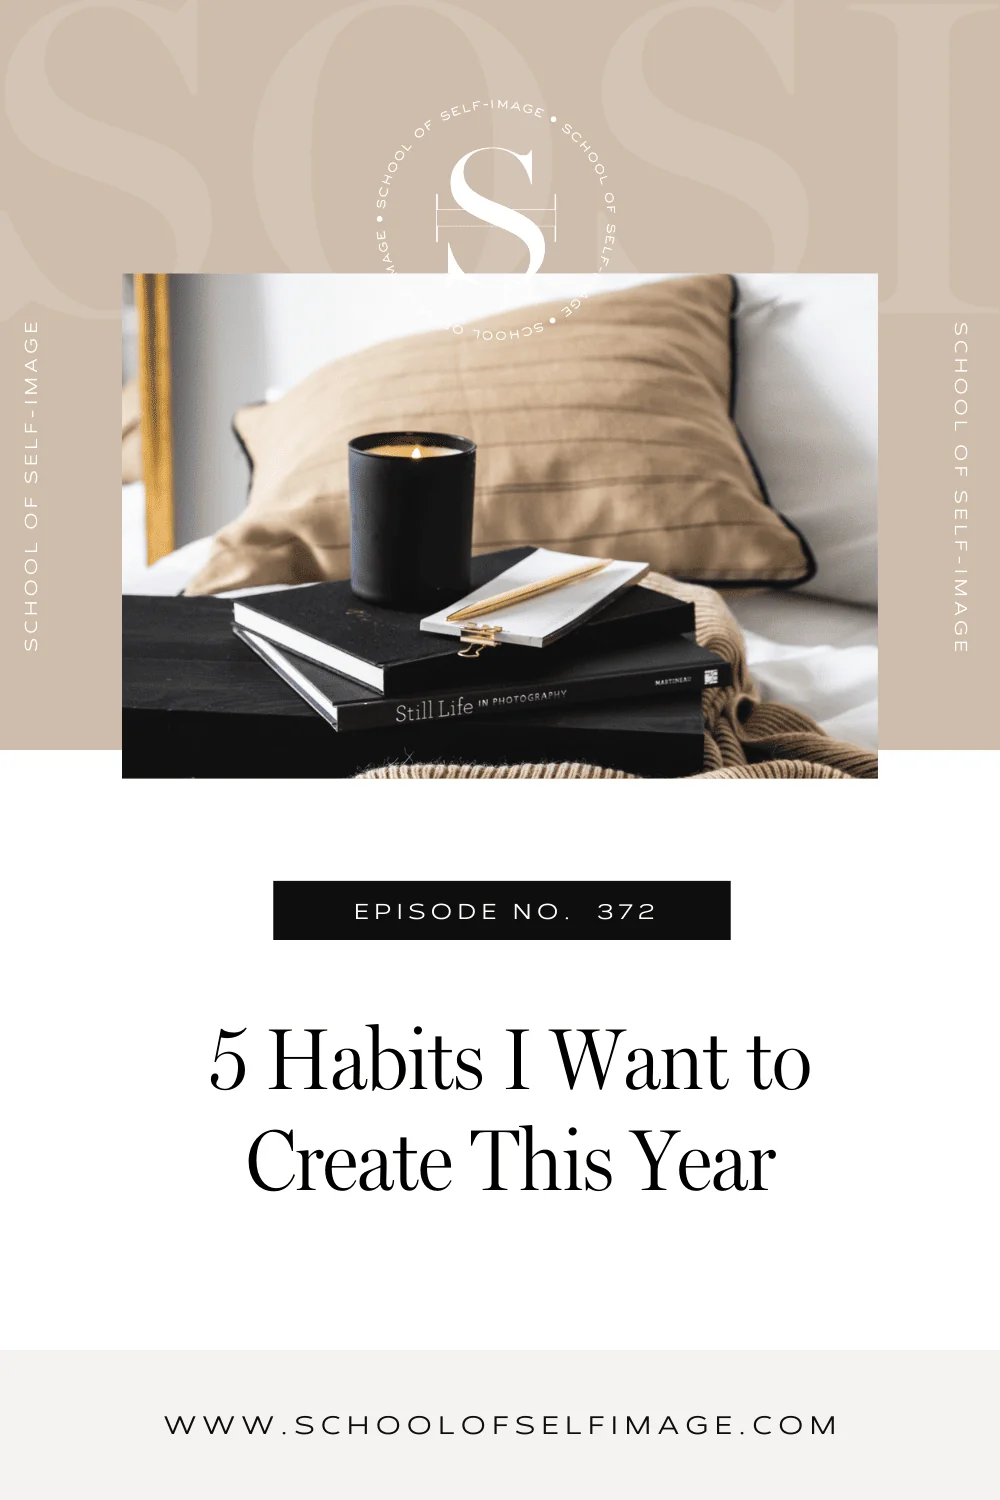 5 Habits I Want to Create This Year